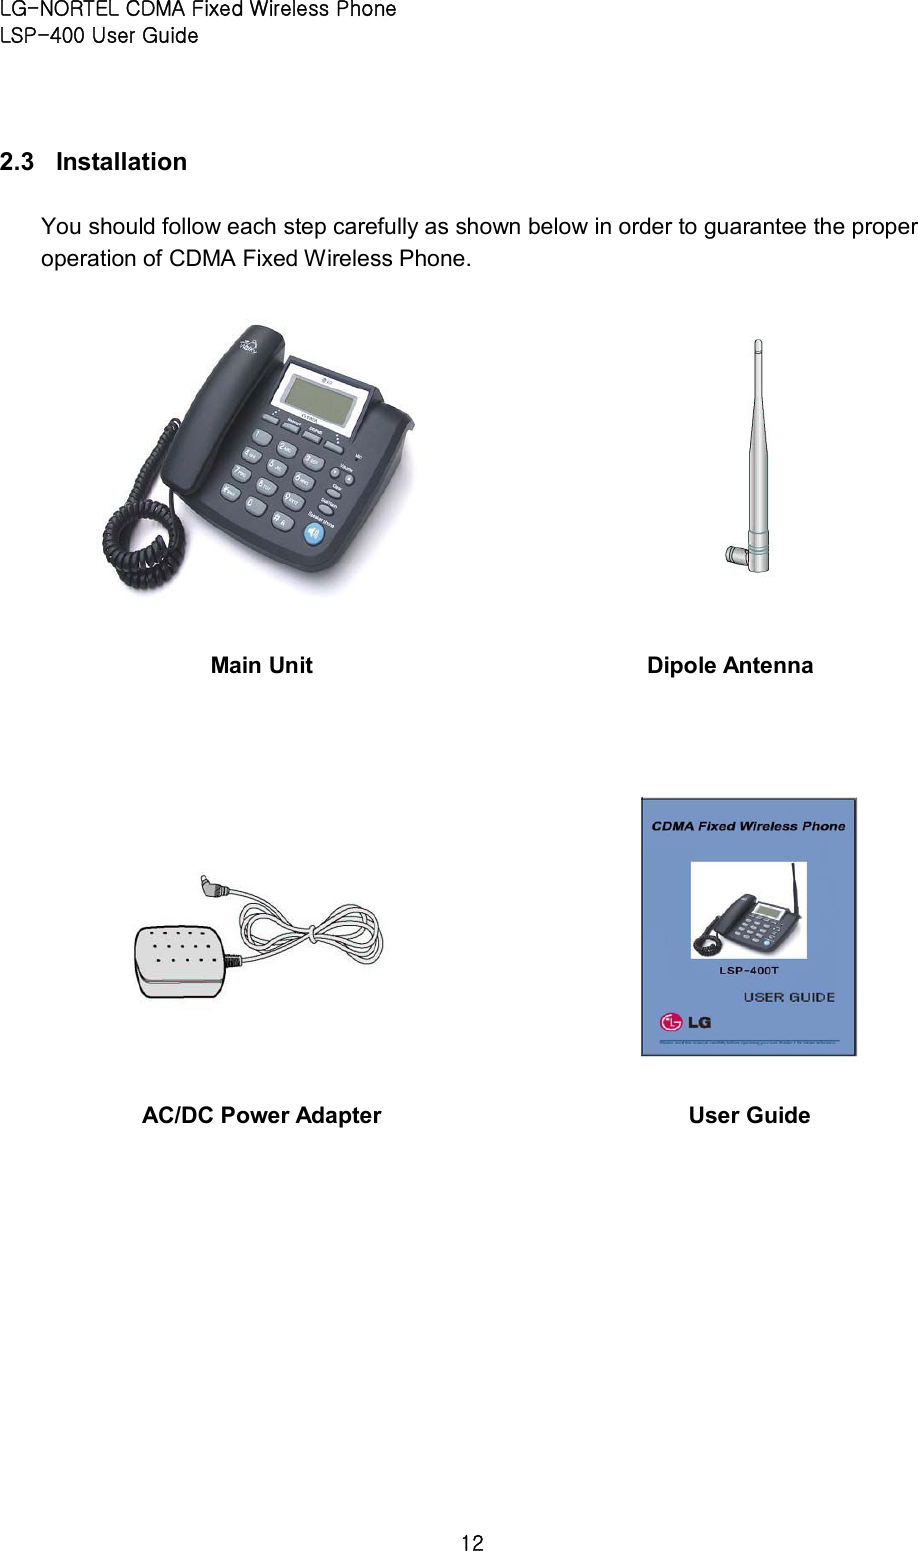 LG-NORTEL CDMA Fixed Wireless Phone   LSP-400 User Guide 12 2.3  Installation   You should follow each step carefully as shown below in order to guarantee the proper operation of CDMA Fixed Wireless Phone.                                   Main Unit   Dipole Antenna   AC/DC Power Adapter   User Guide 